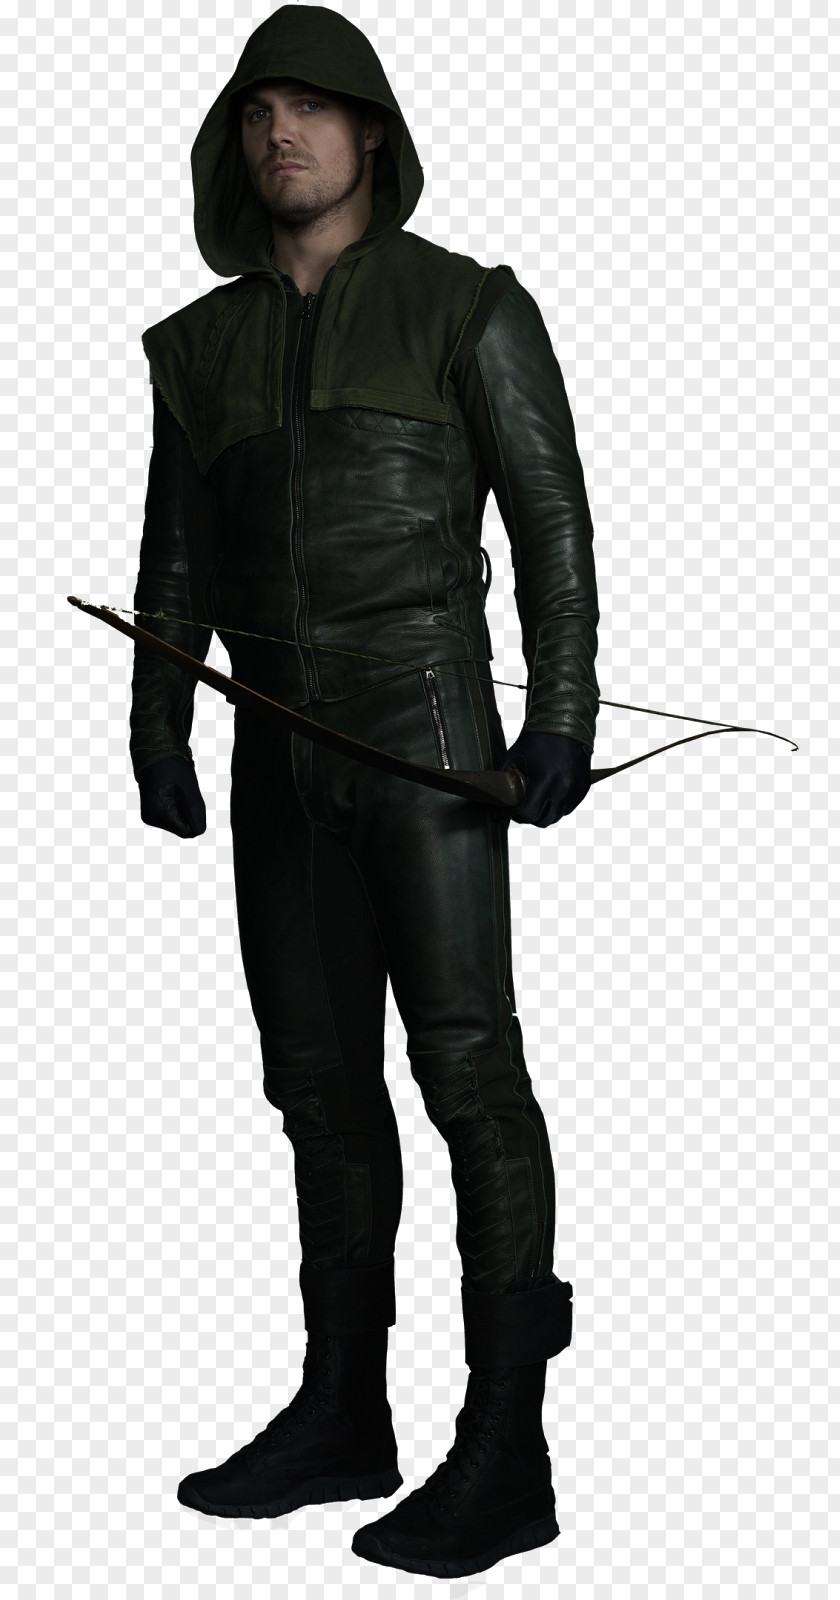 5 Green Arrow Black Canary Stephen Amell Roy Harper PNG